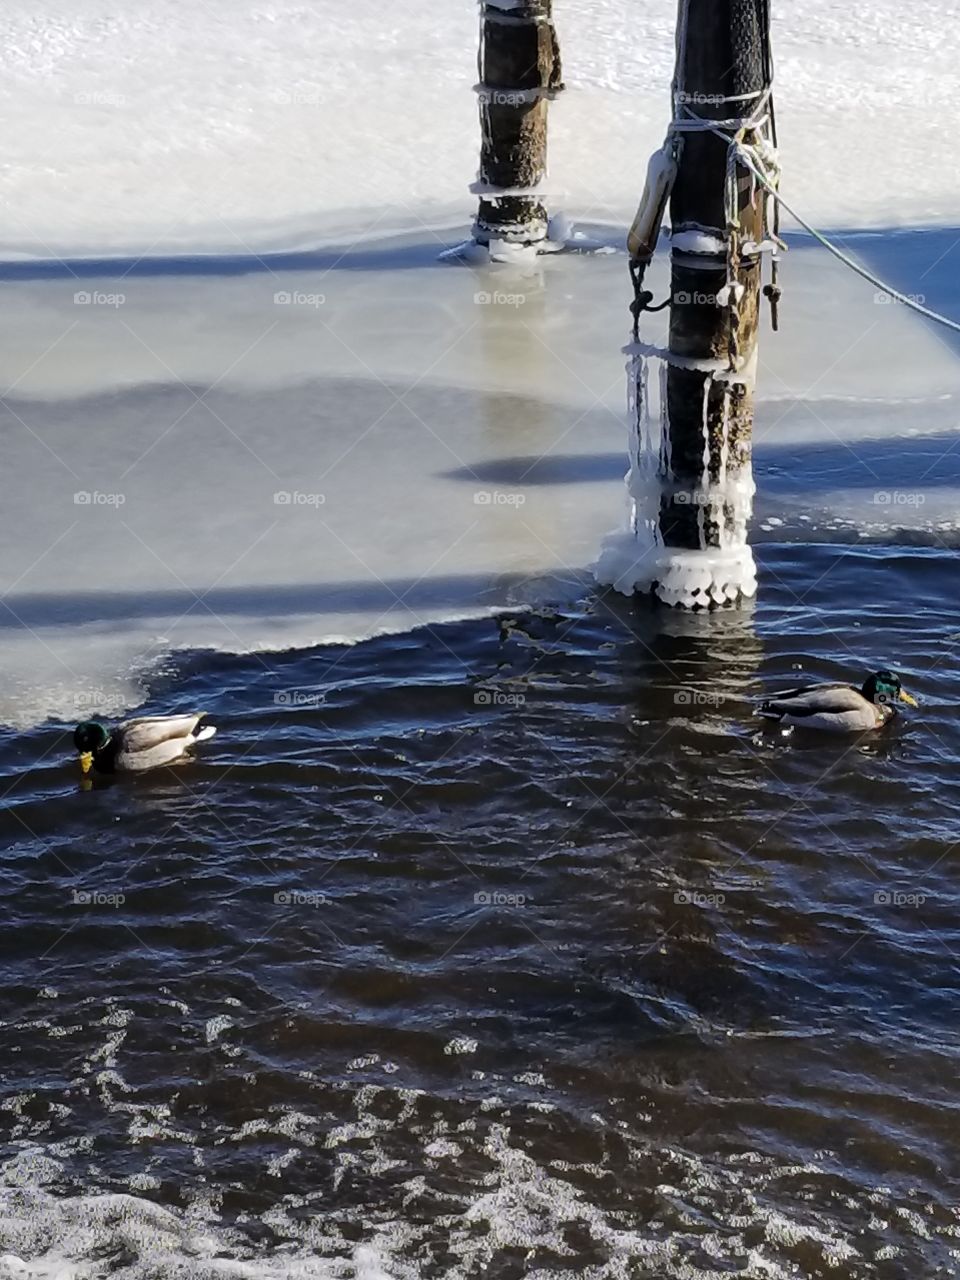 Duck having fun in the cold water .